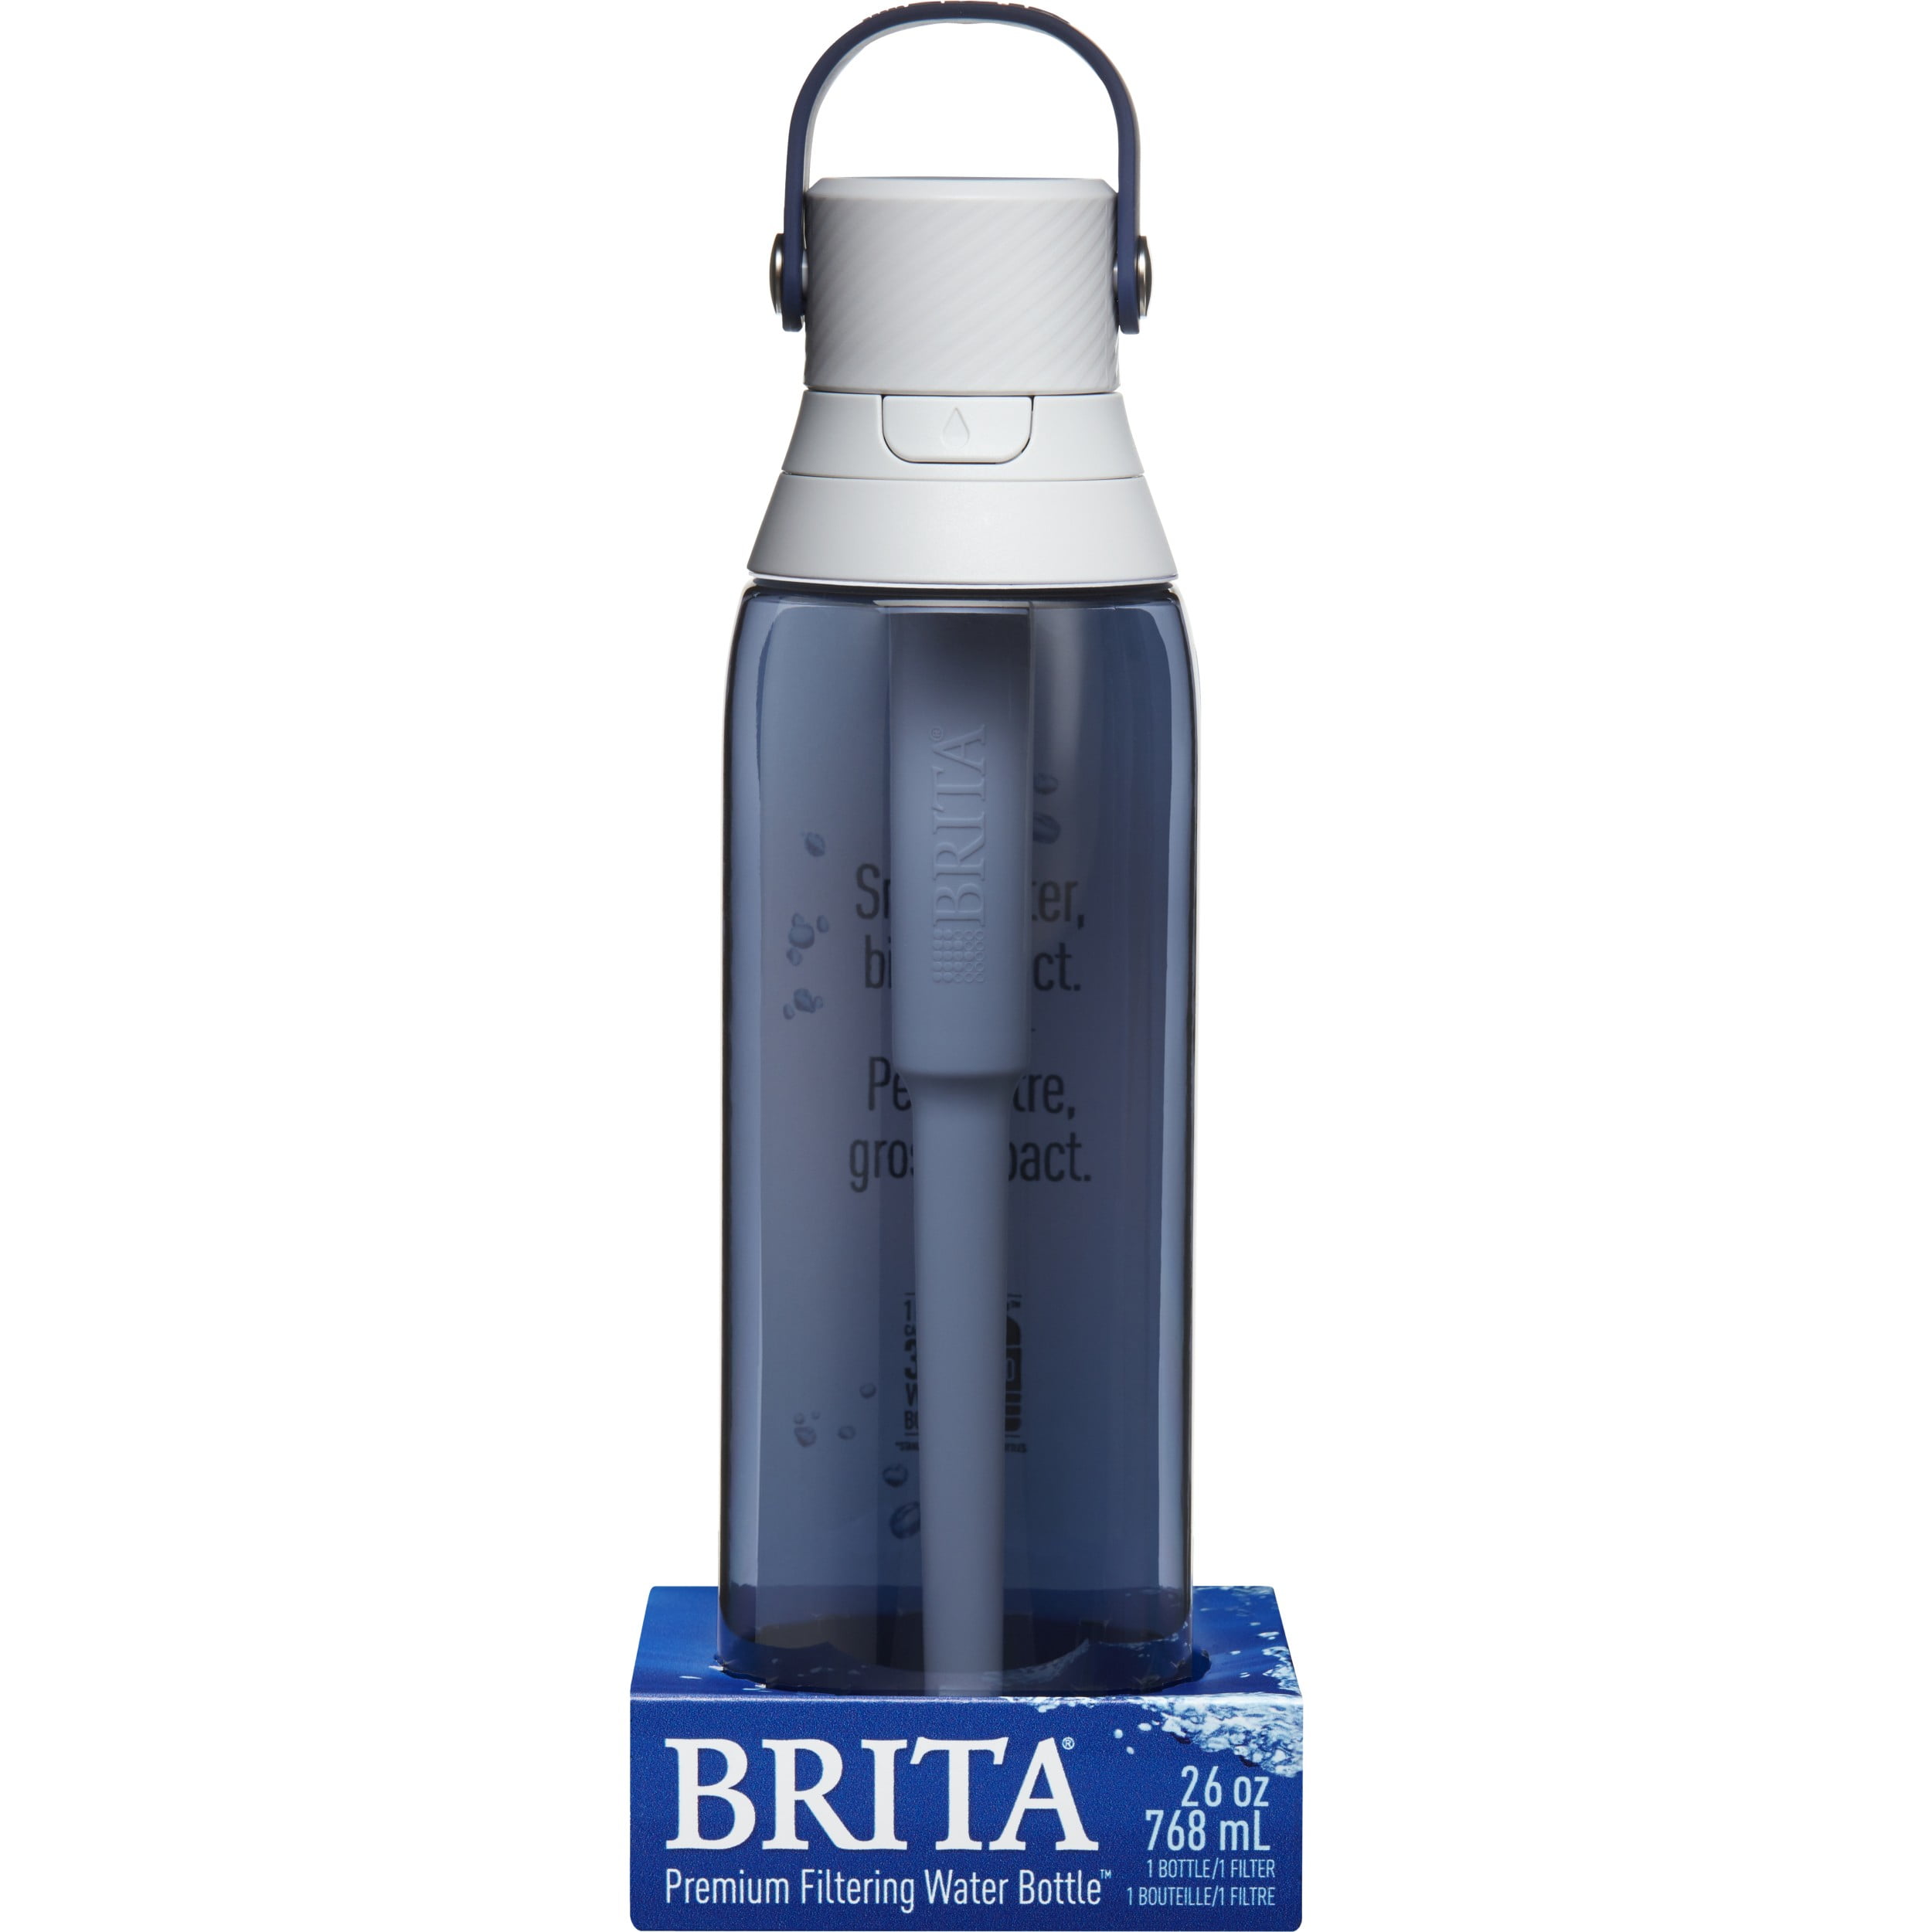 Brita Premium 26 oz. Filtering Water Bottle with BPA Free in Sea Glass Blue  6025836519 - The Home Depot